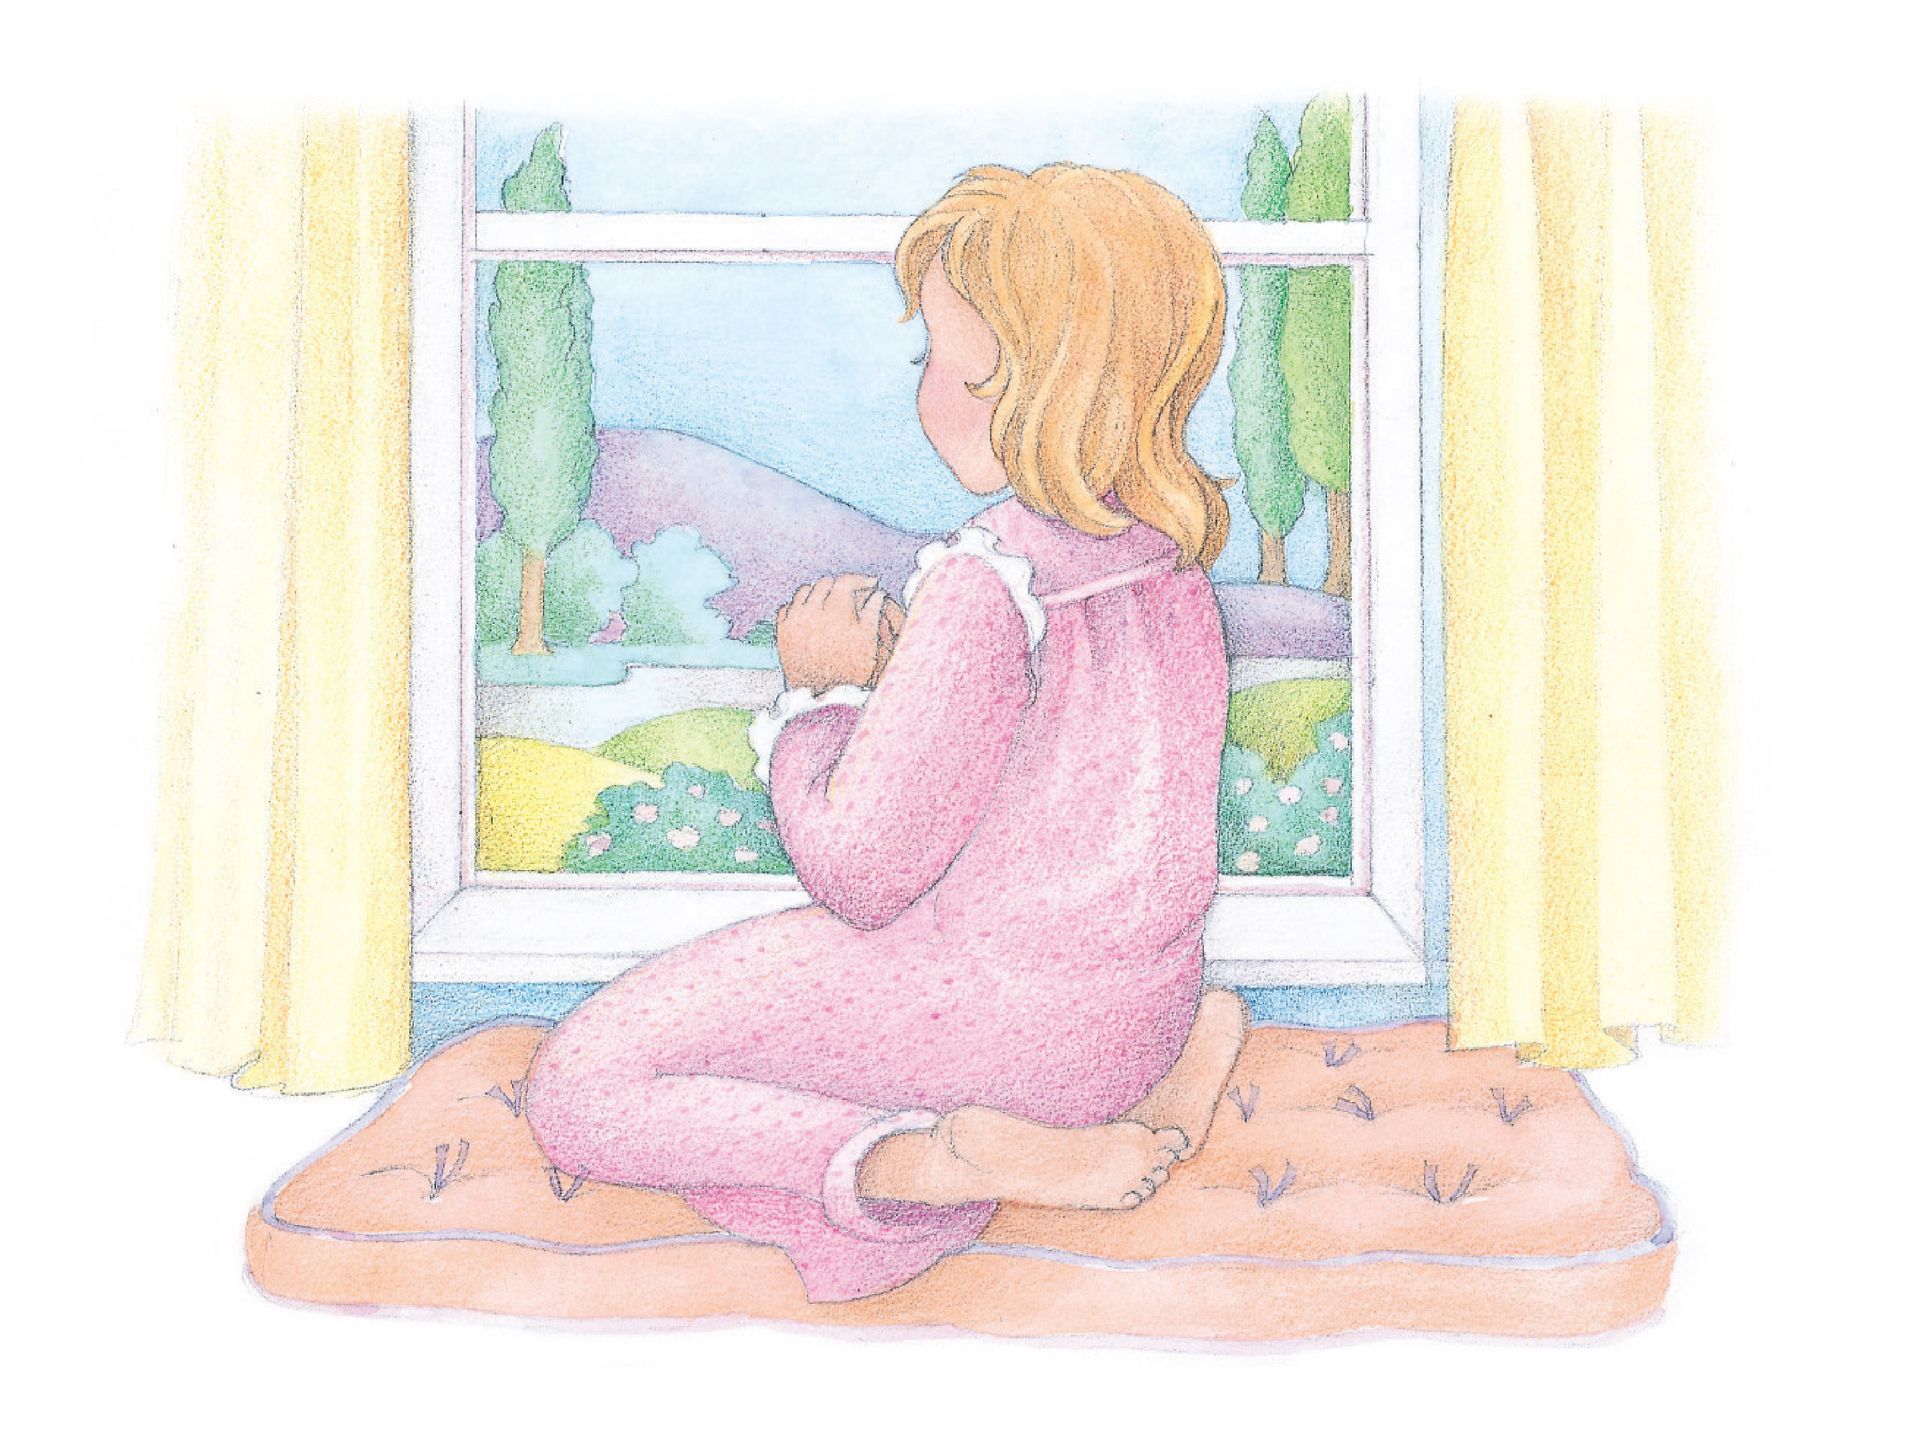 A girl kneeling on a window seat and looking out the window. From the Children’s Songbook, page 106, “The Still Small Voice”; watercolor illustration by Phyllis Luch.